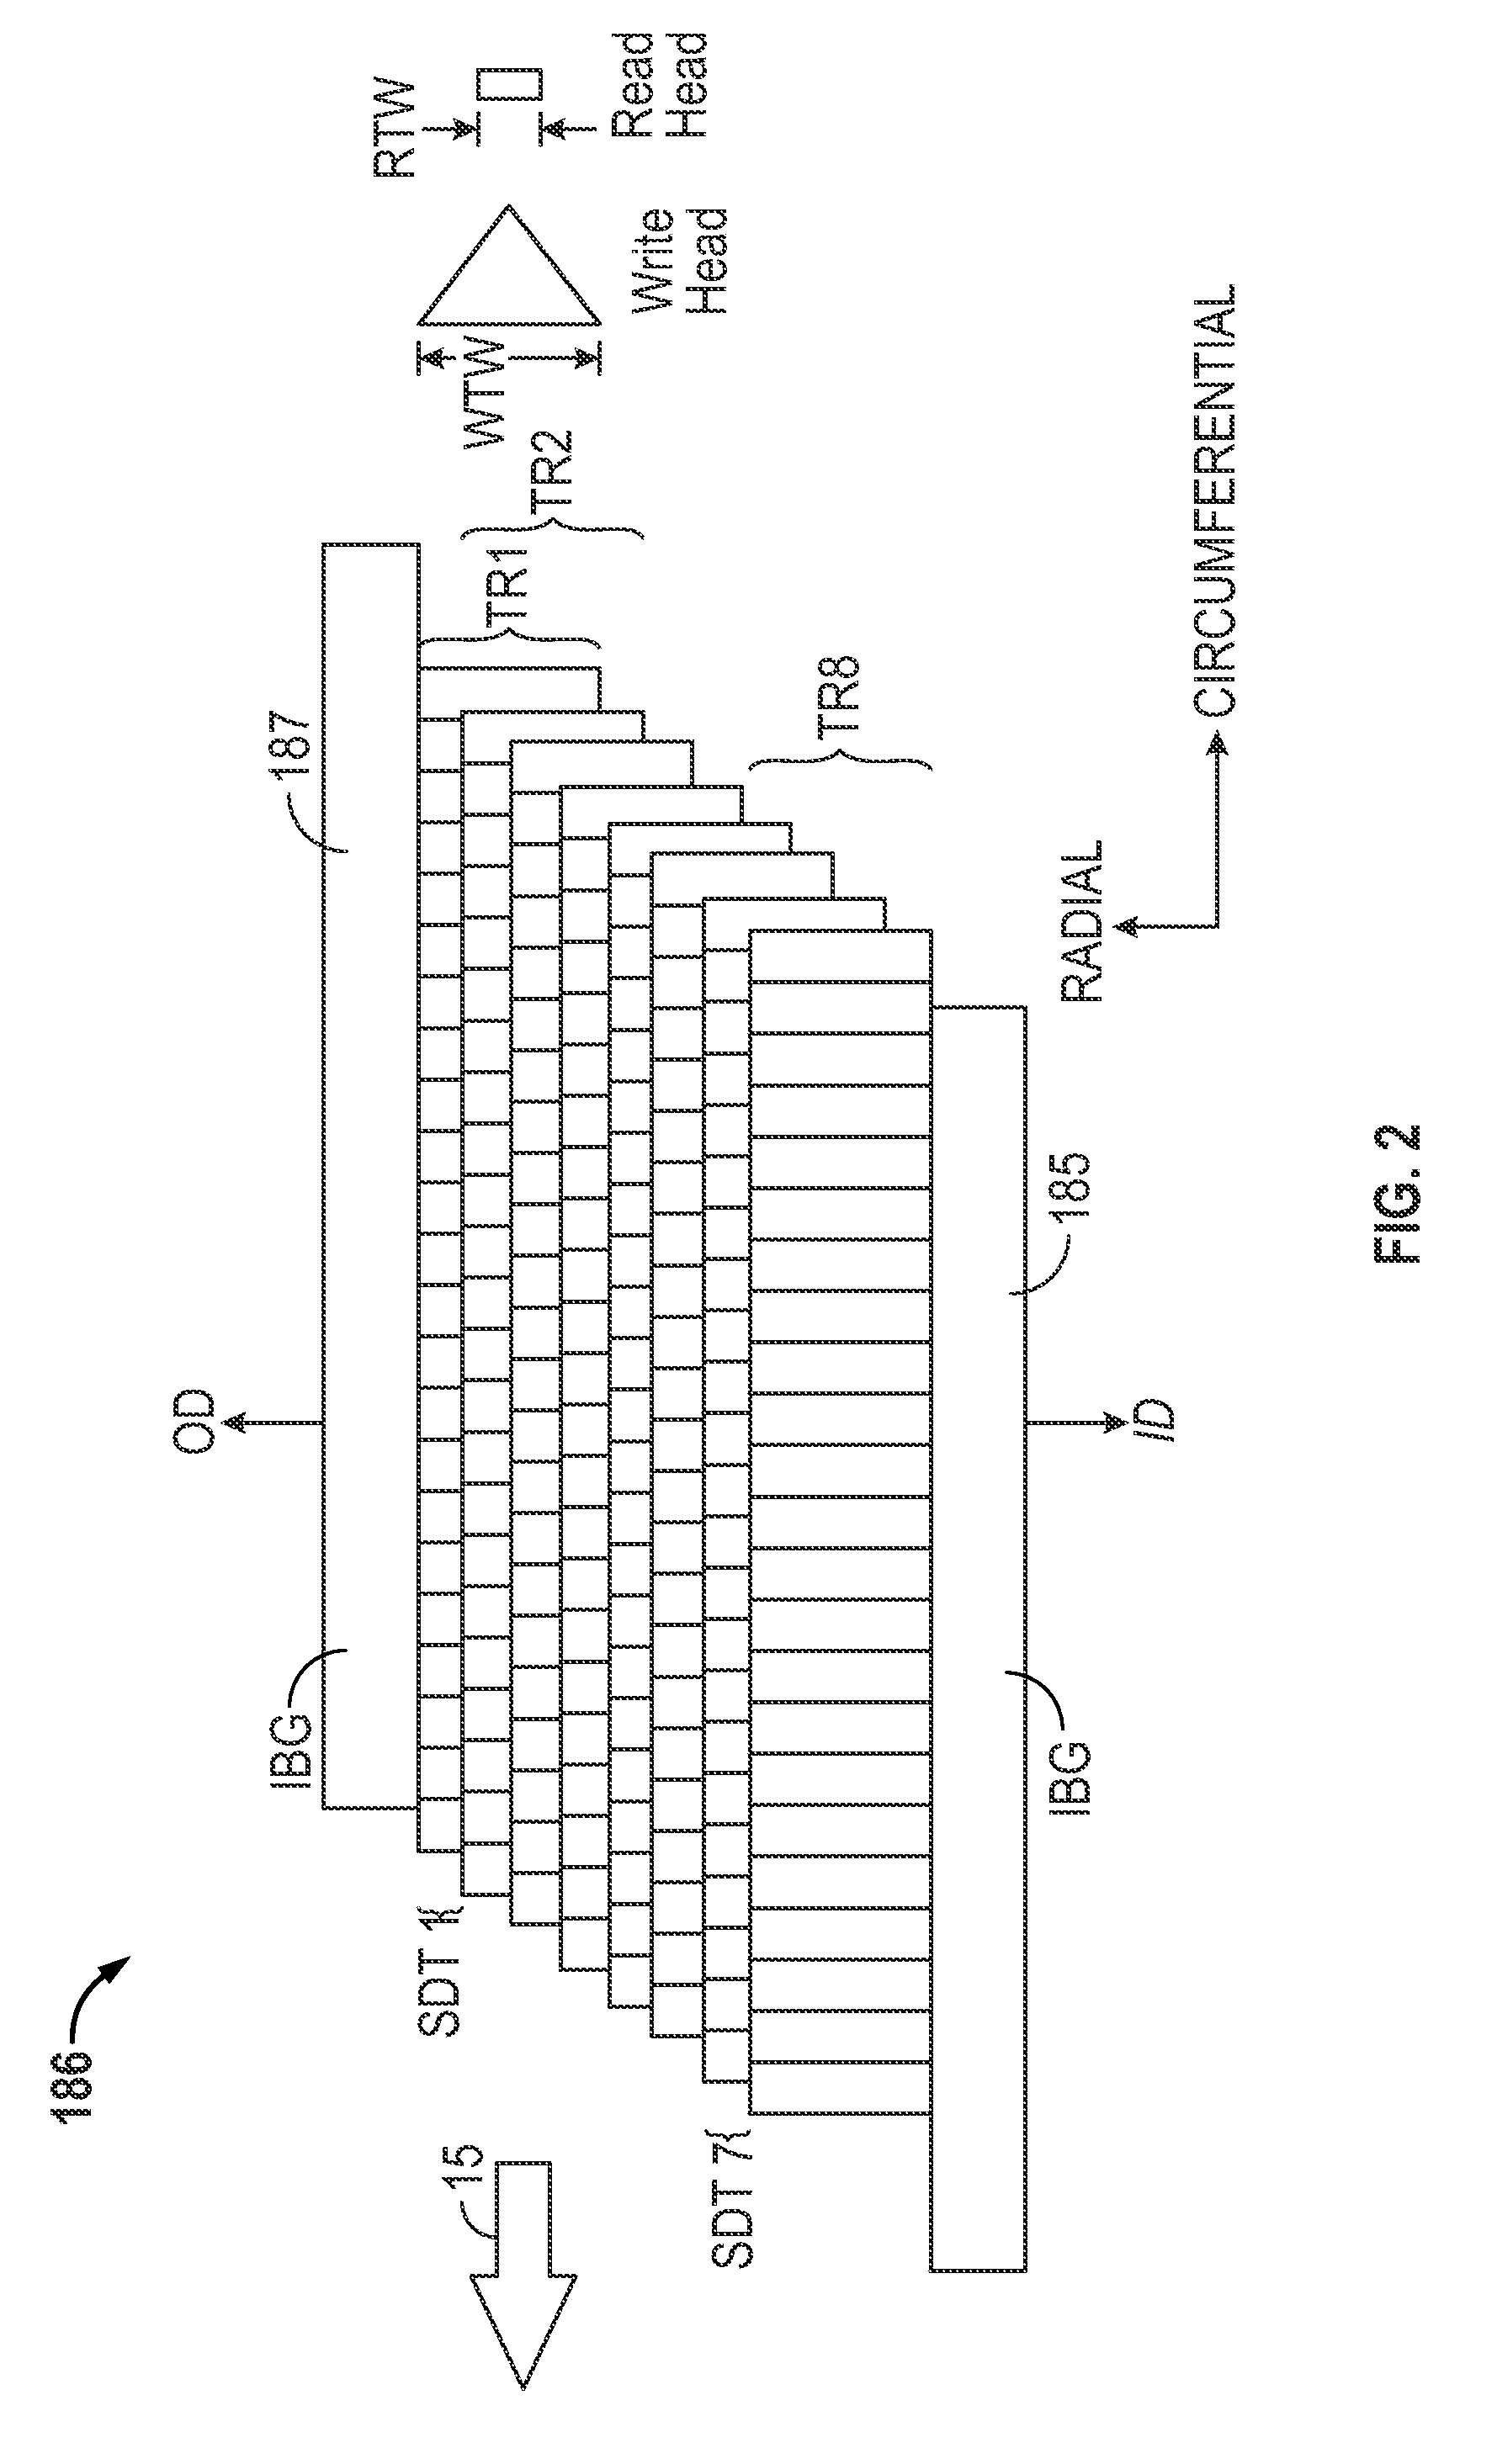 Shingled magnetic recording disk drive with minimization of the effect of far track erasure on adjacent data bands